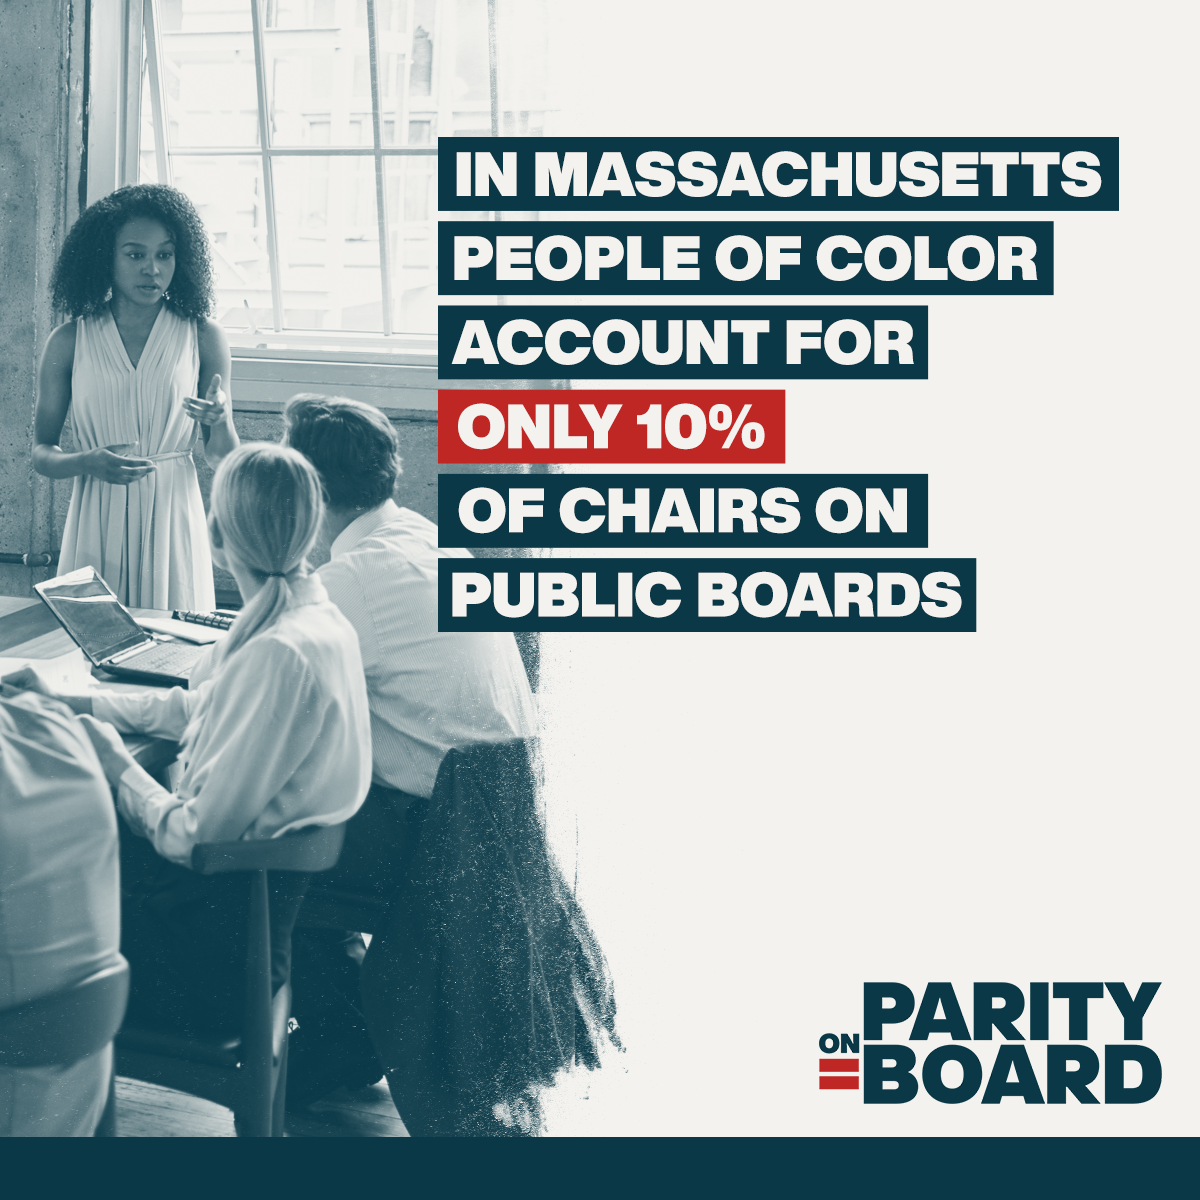 Statistic of 10% of board chairs on Massachusetts public boards are people of color